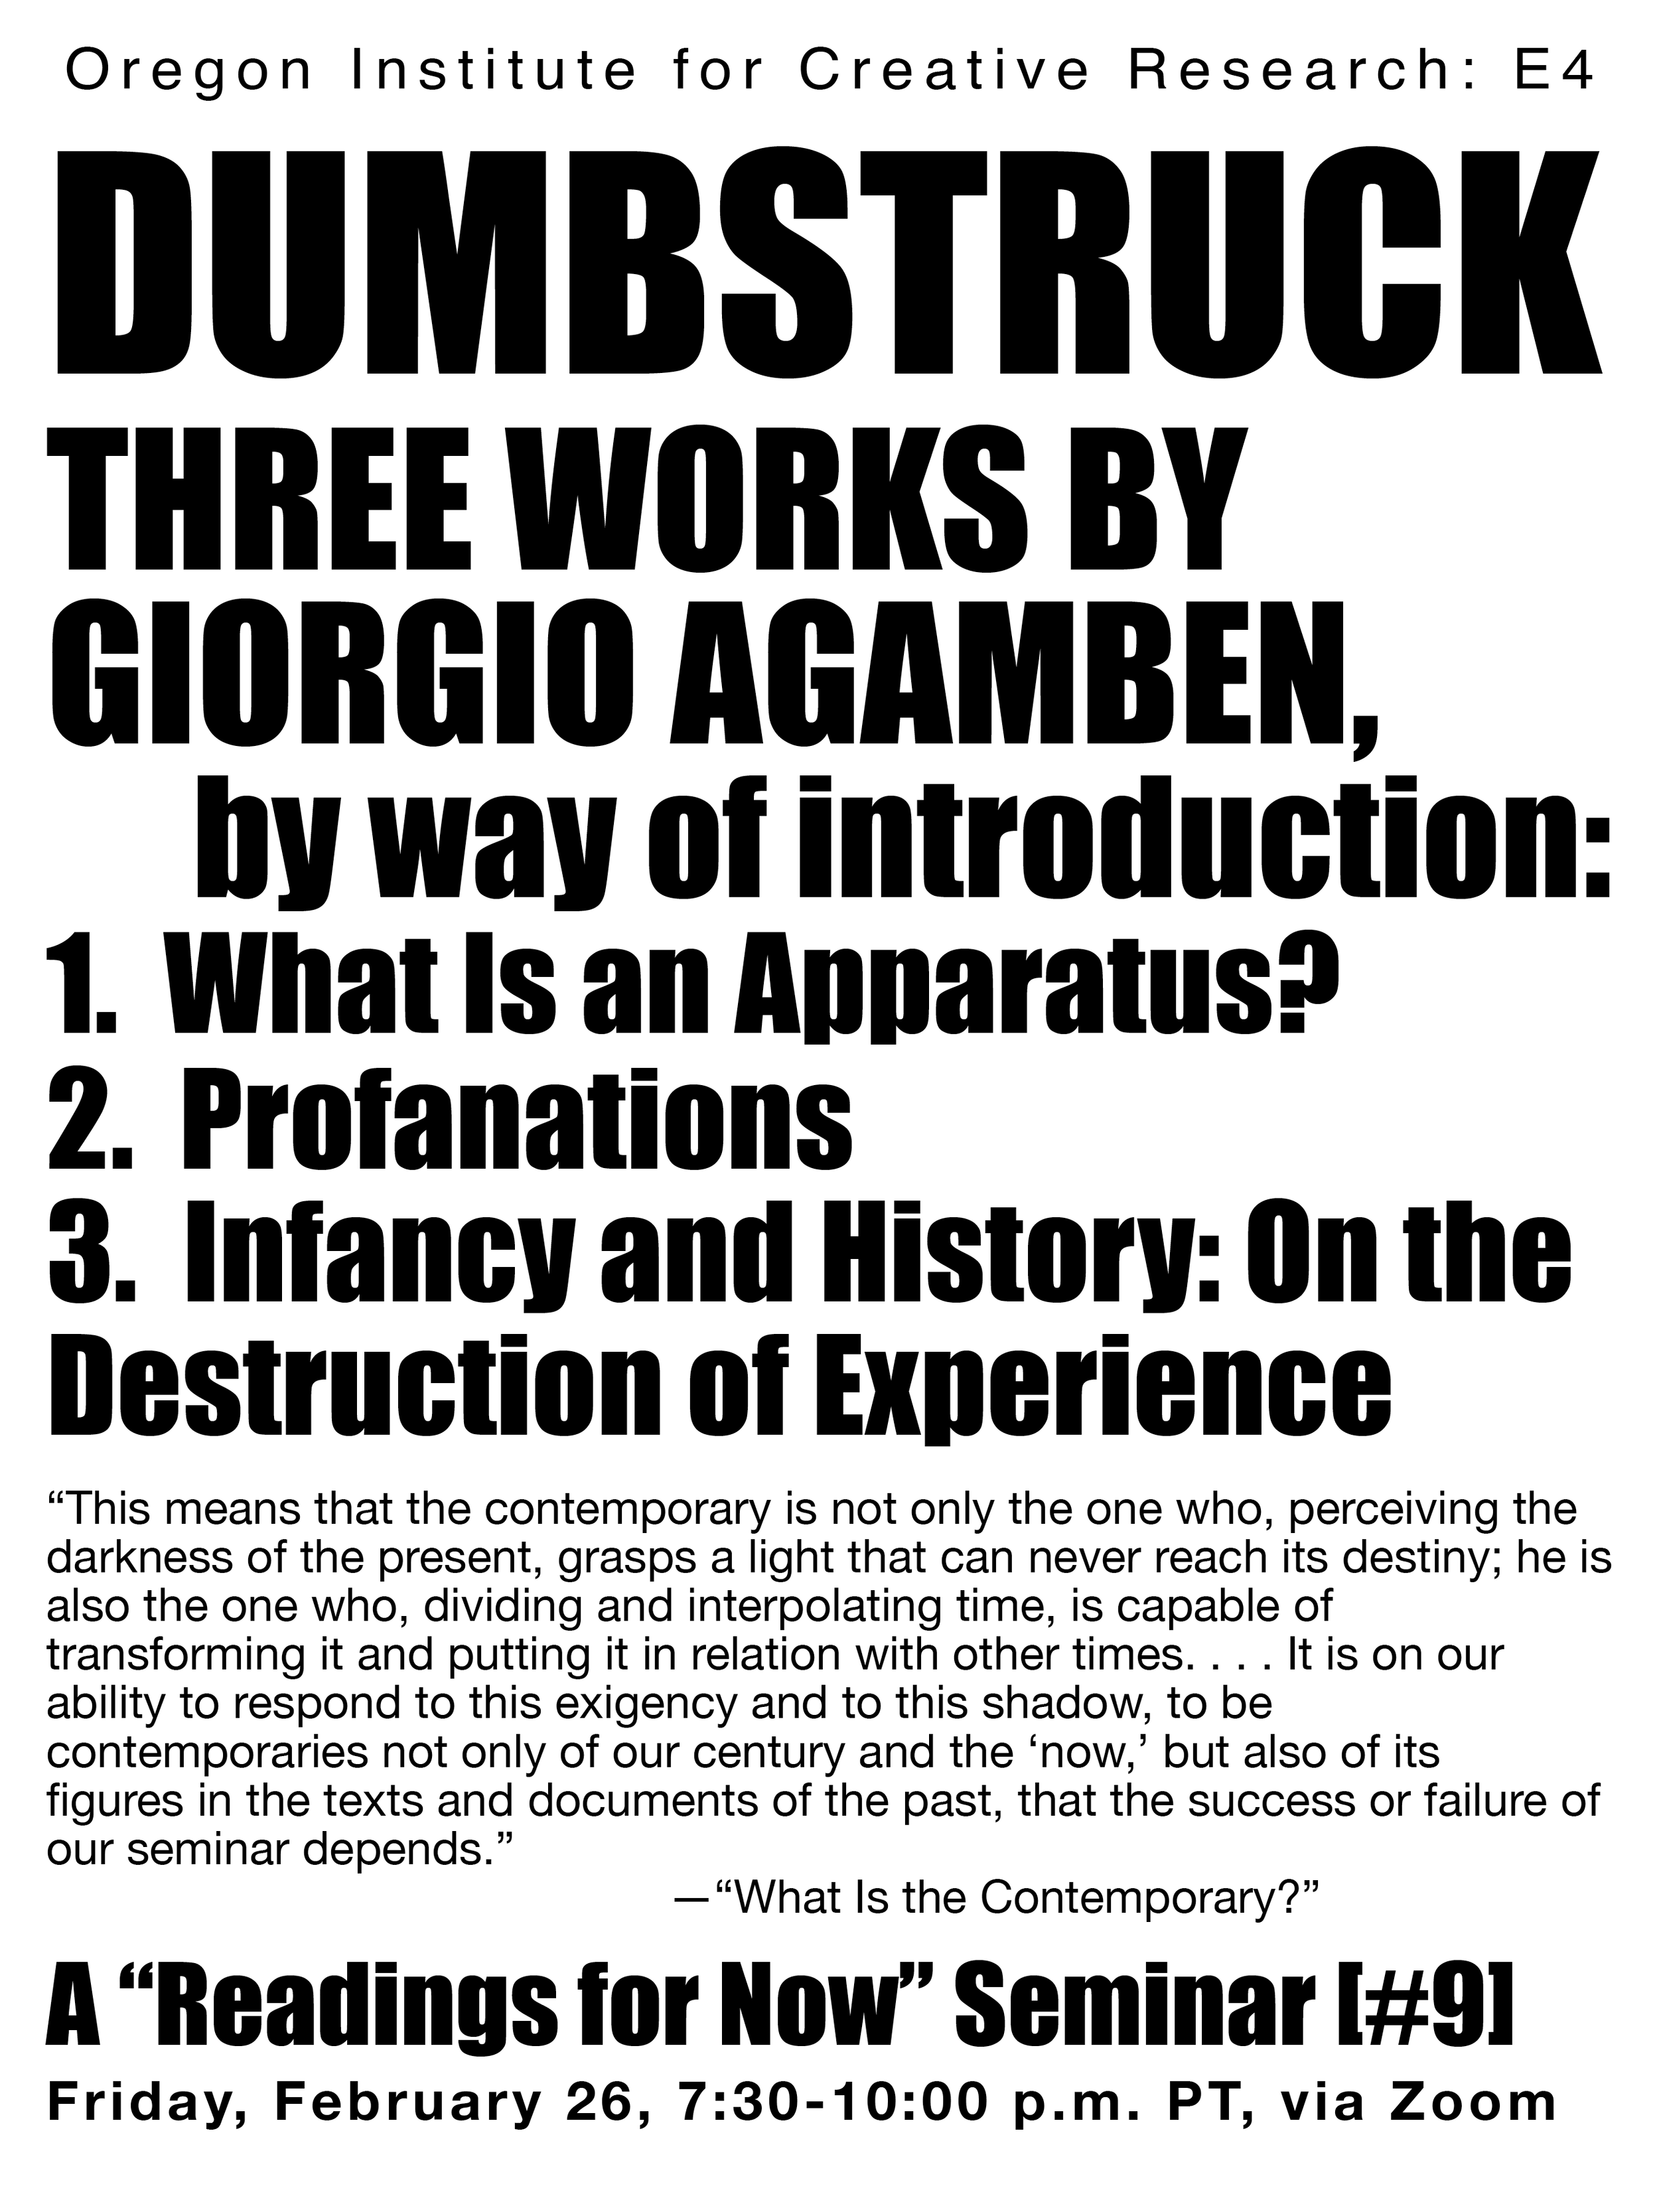 #9: DUMBSTRUCK (Three Works by Giorgio Agamben)